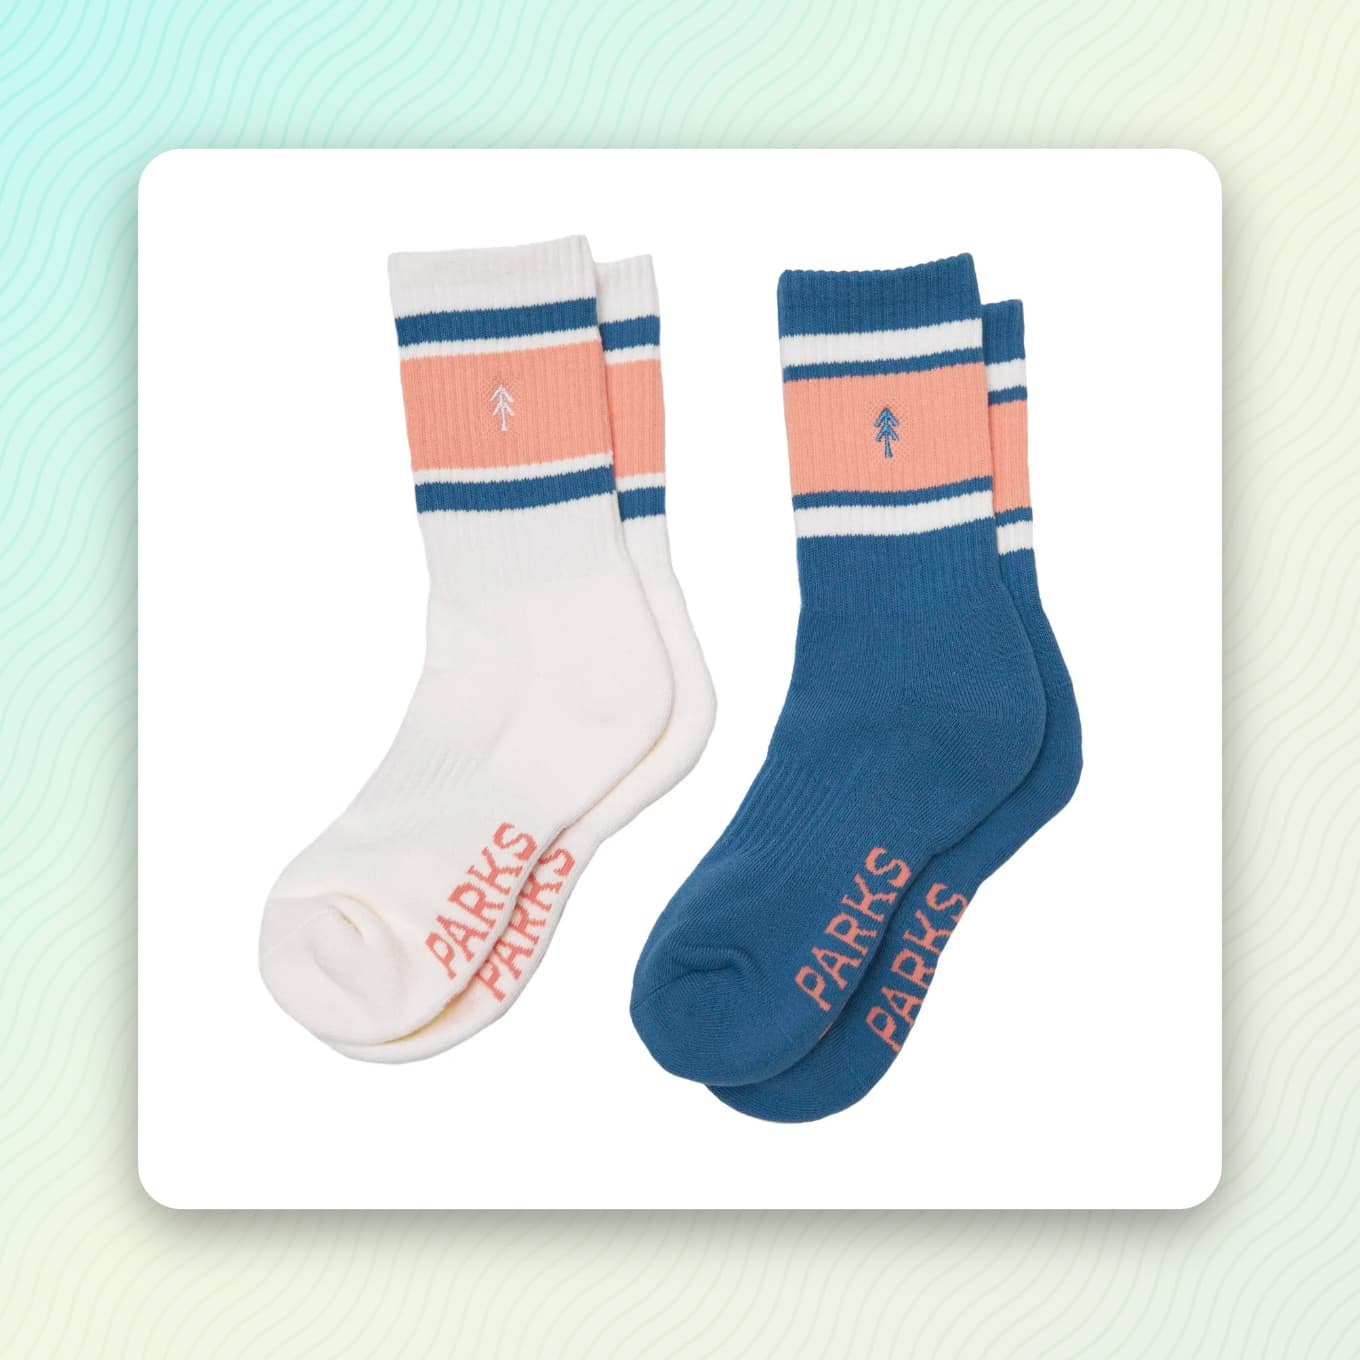 Socks that say "Parks" with a tree on them